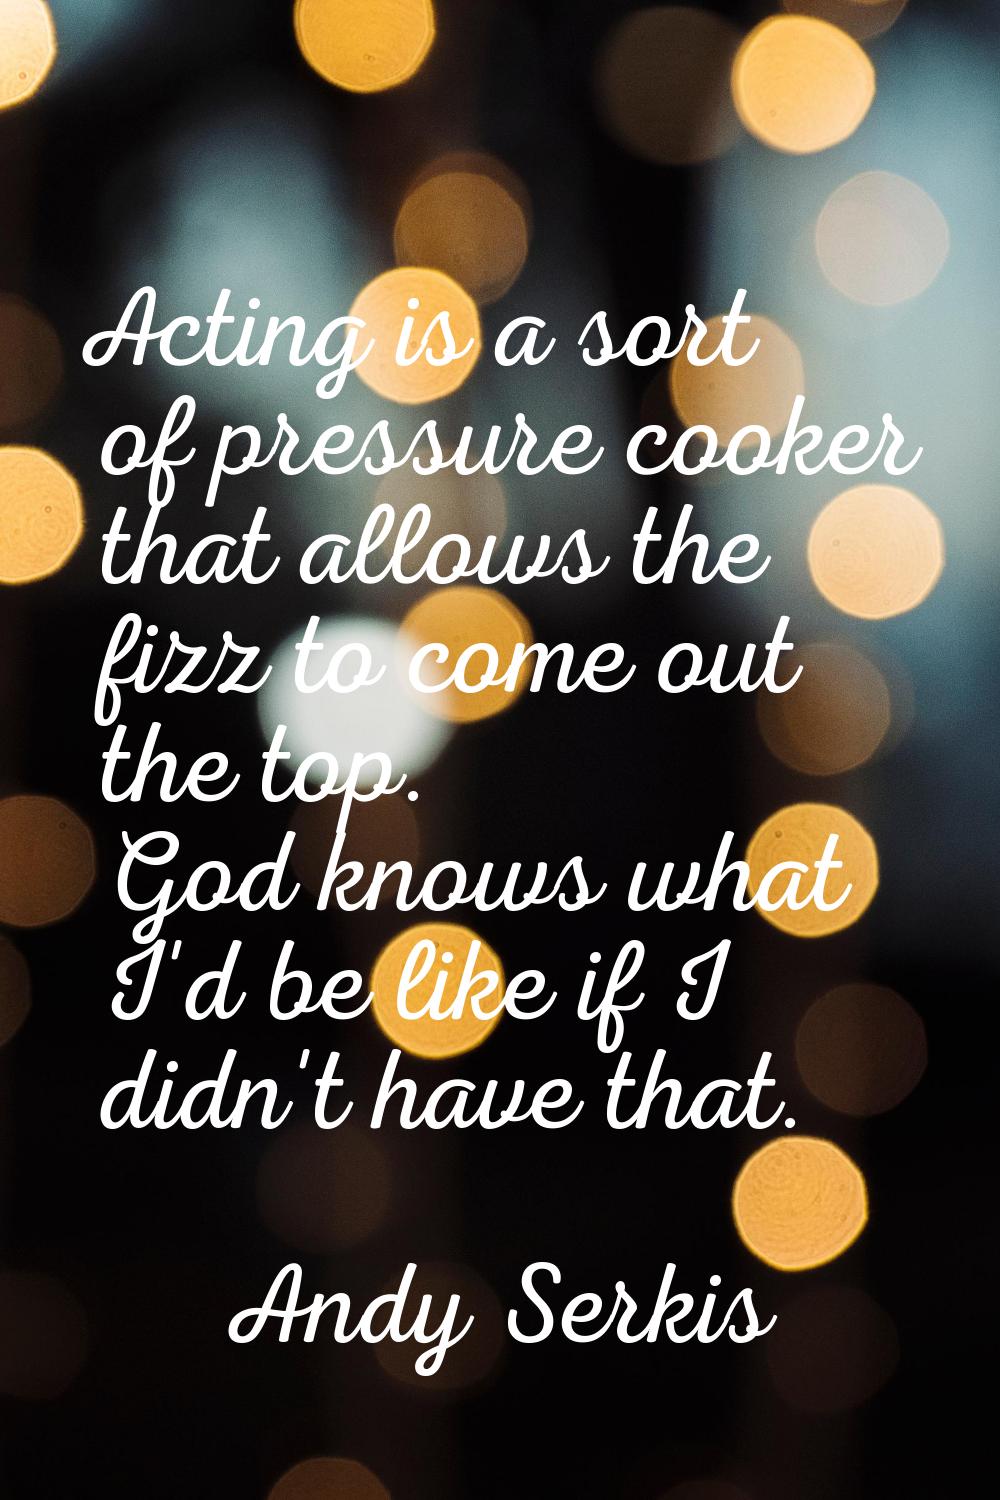 Acting is a sort of pressure cooker that allows the fizz to come out the top. God knows what I'd be